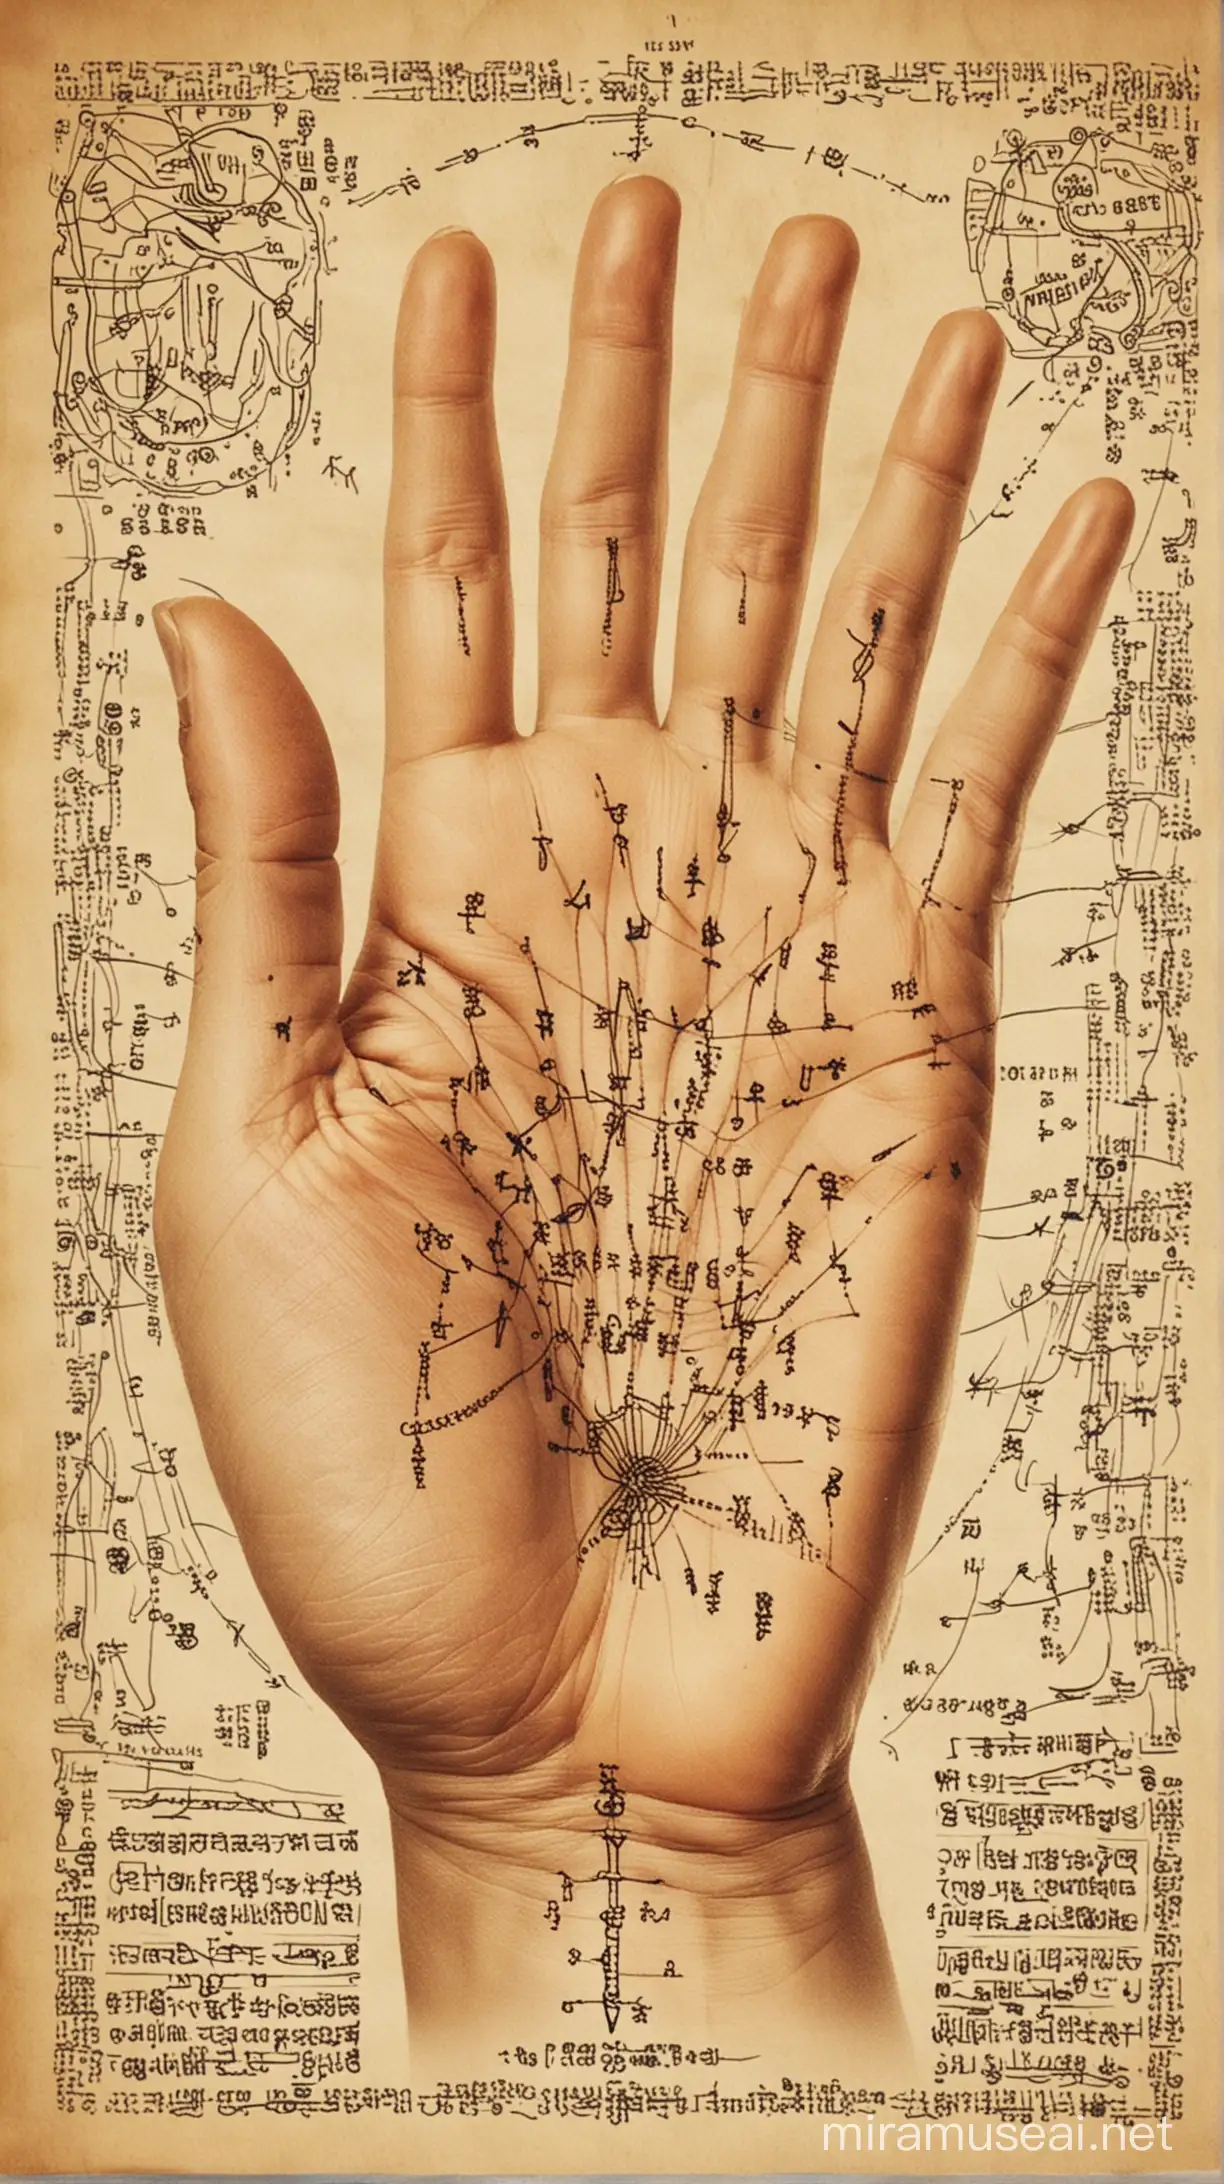 Illustration of Palmistry Practice with Mystic Symbols and Hand Gestures